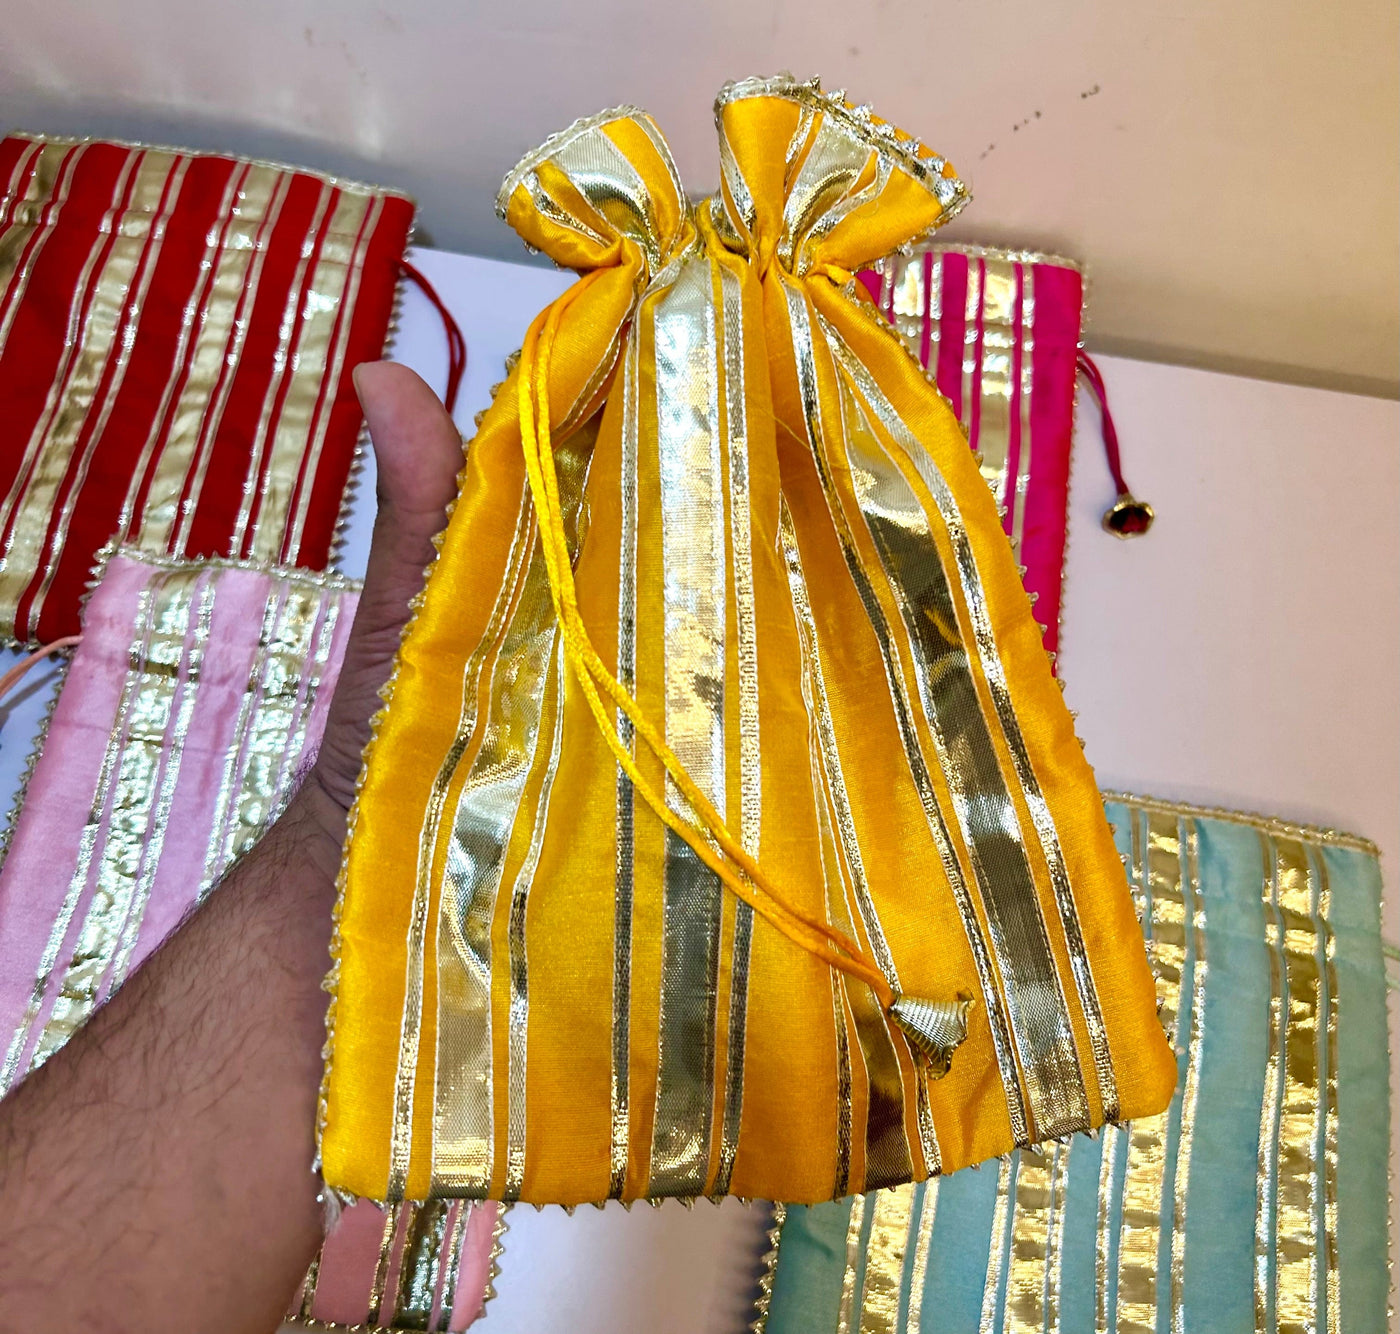 65 Rs each on buying 50+ pcs | WhatsApp at 8619550223 to order Women's Potli Bag LAMANSH 8*10 inch Designer Gota line Potli bags for dry fruits gift 🎁 packaging  / for wedding return gifts 🎁 and favours